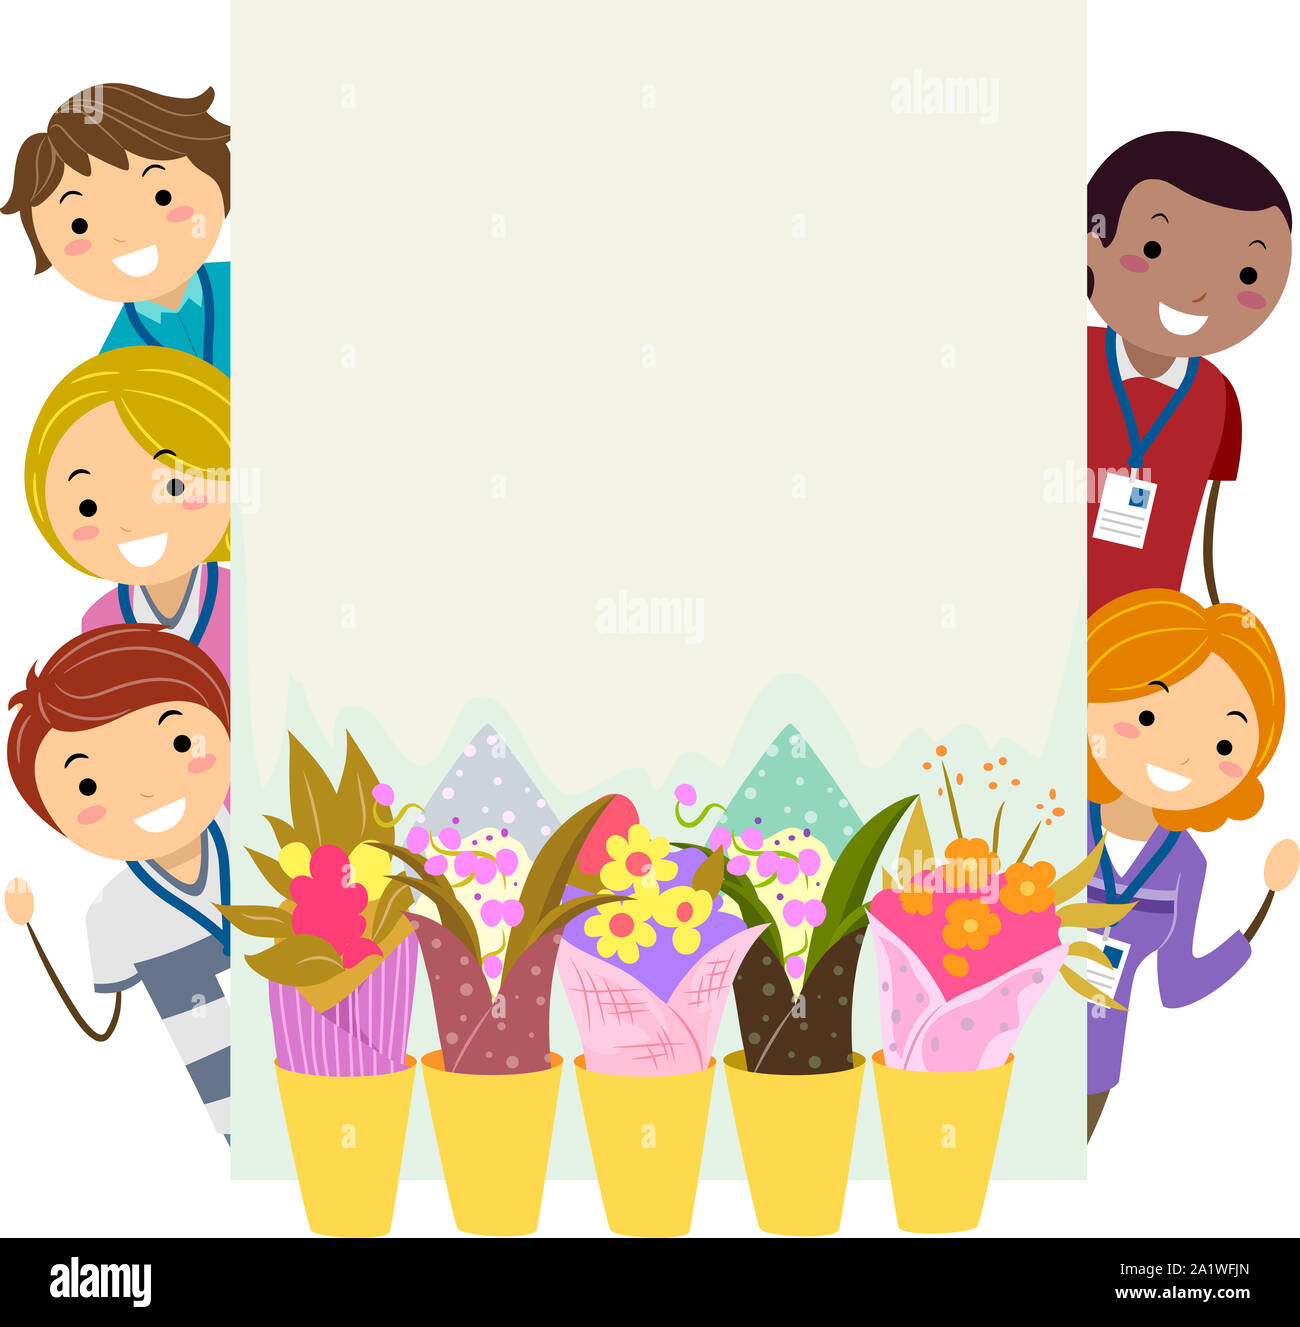 Illustration of Stickman Parents and Teachers Behind a Blank Board with Flowers for Spring Sale and Fundraising Stock Photo